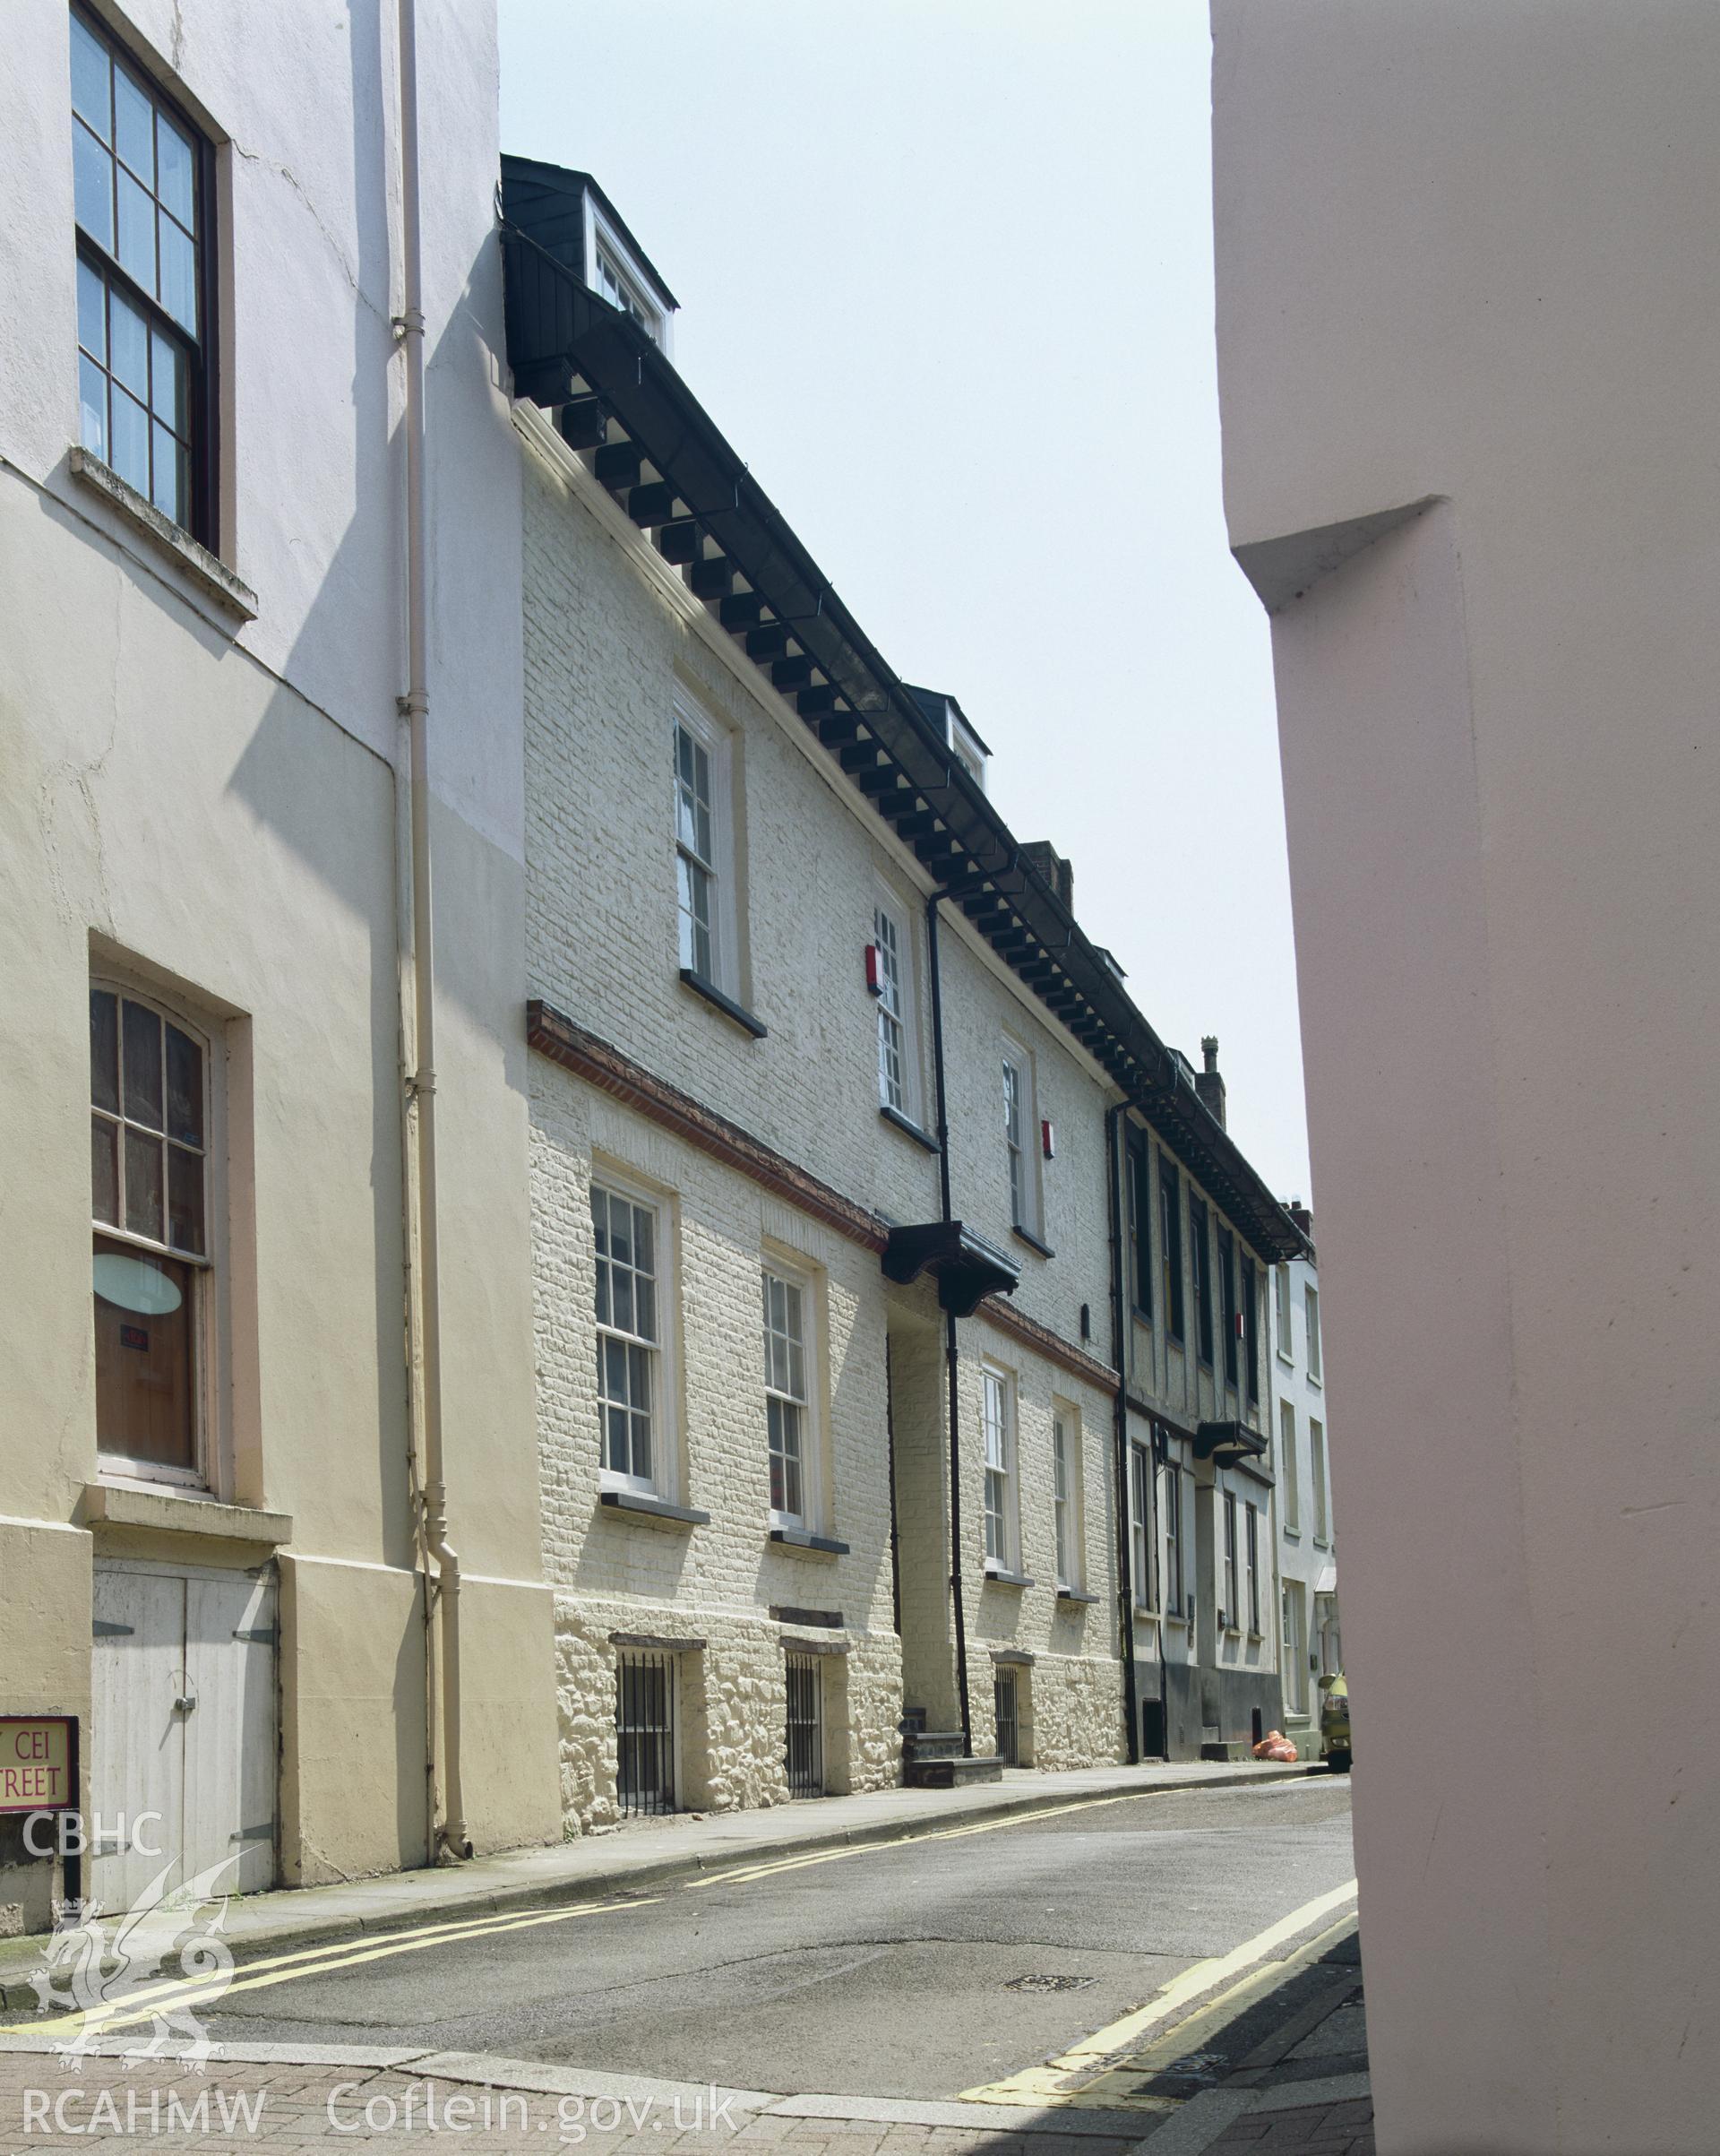 Colour transparency showing a general view of 2-3 Quay Street, Carmarthen , produced by Iain Wright, June 2004.